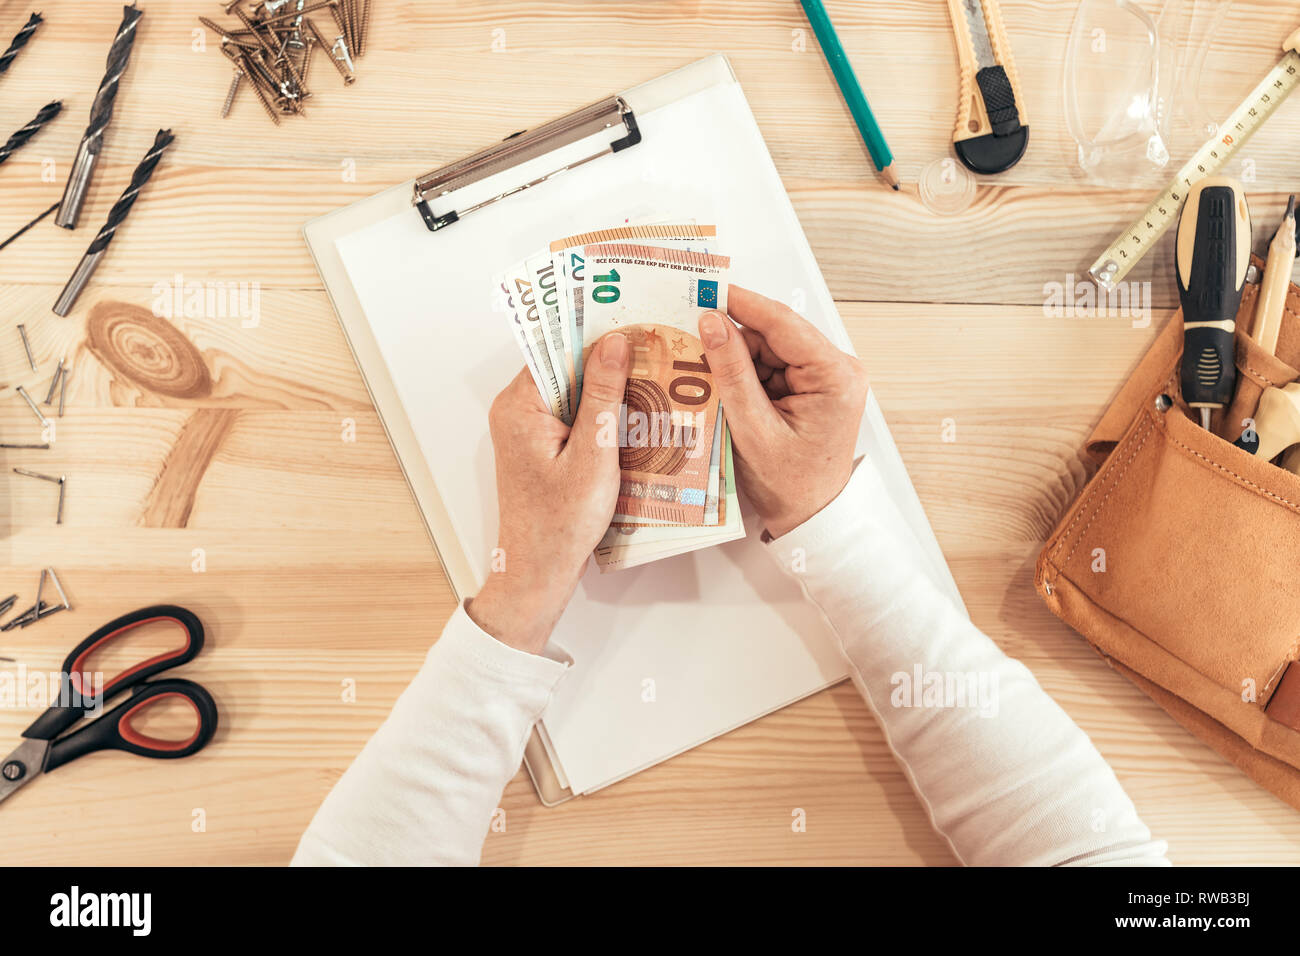 Female carpenter counting money, top view of hands holding European Union Euro paper currency Stock Photo